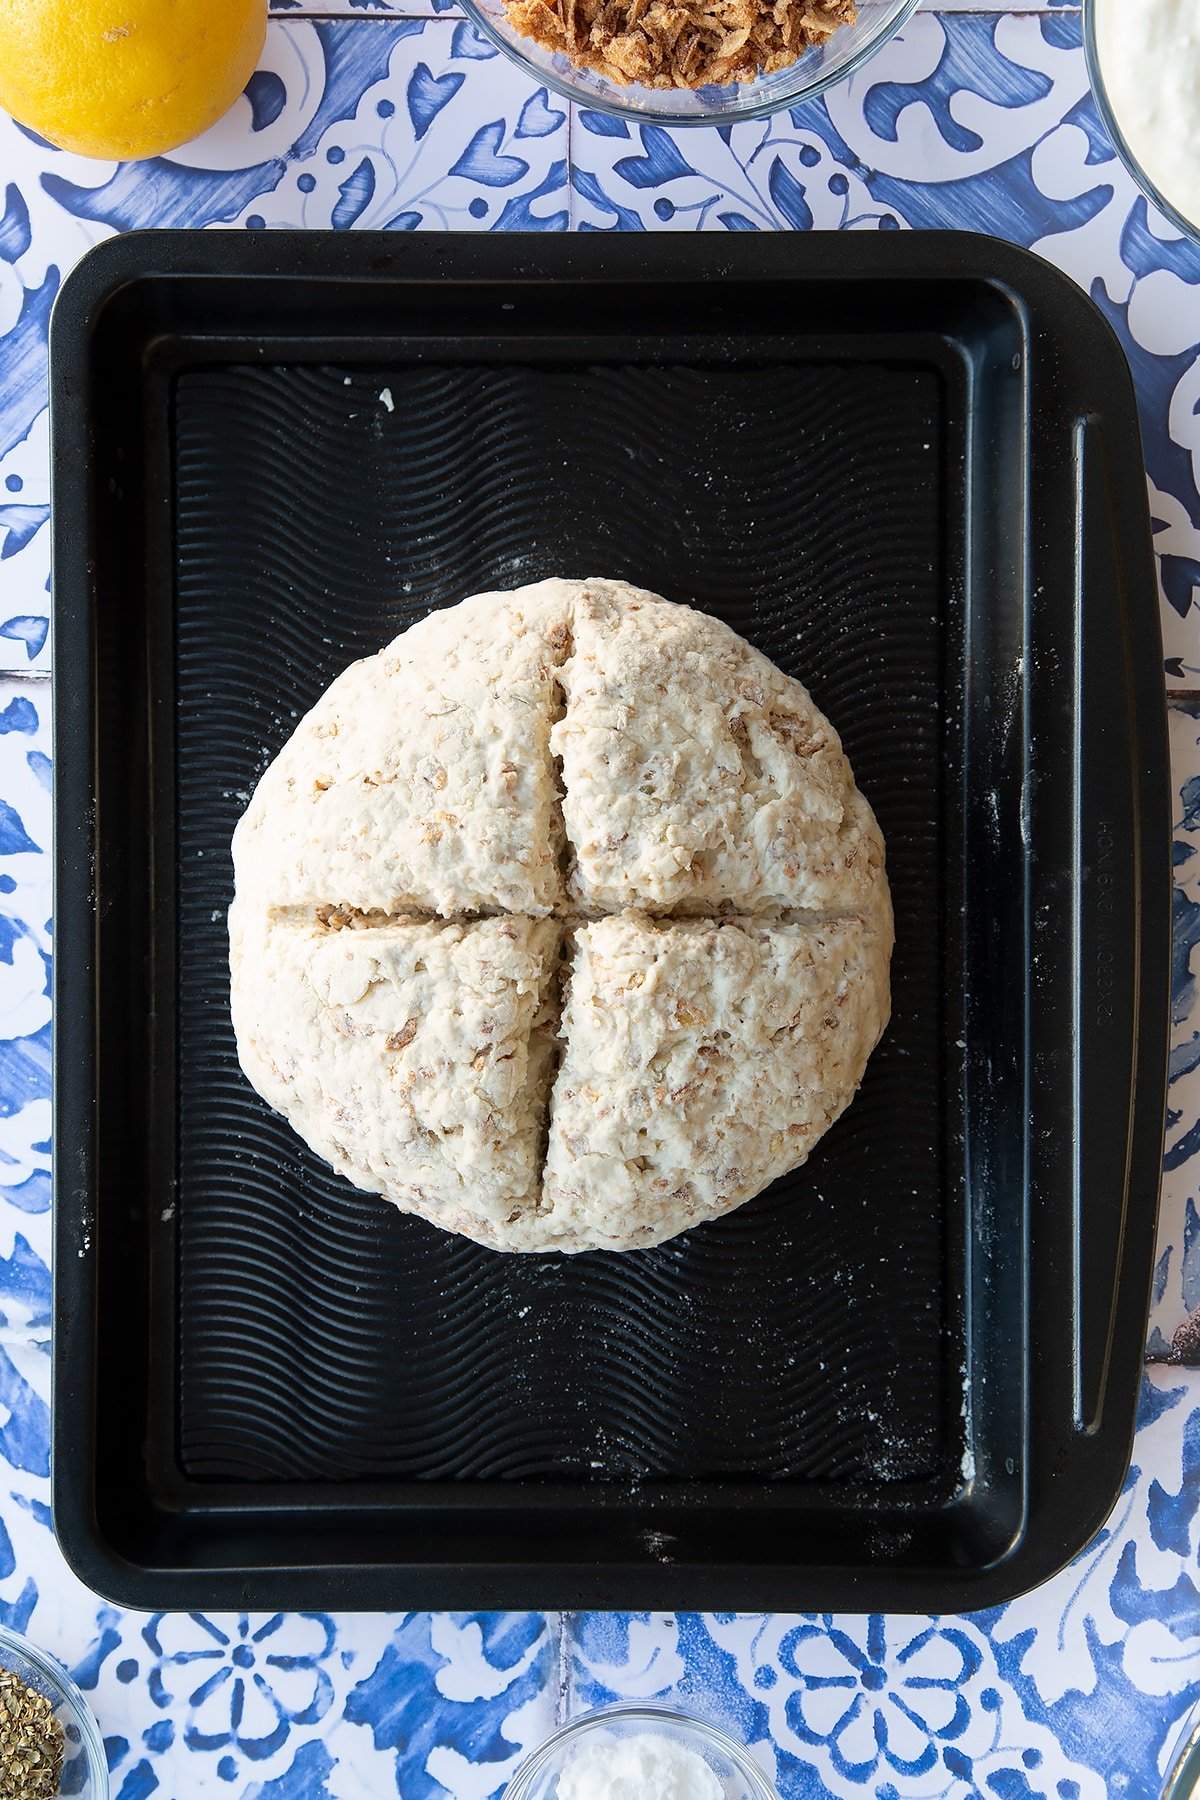 A ball of onion soda bread dough on a baking tray. A cross has been cut into the top. Ingredients to make onion soda bread surround the tray.